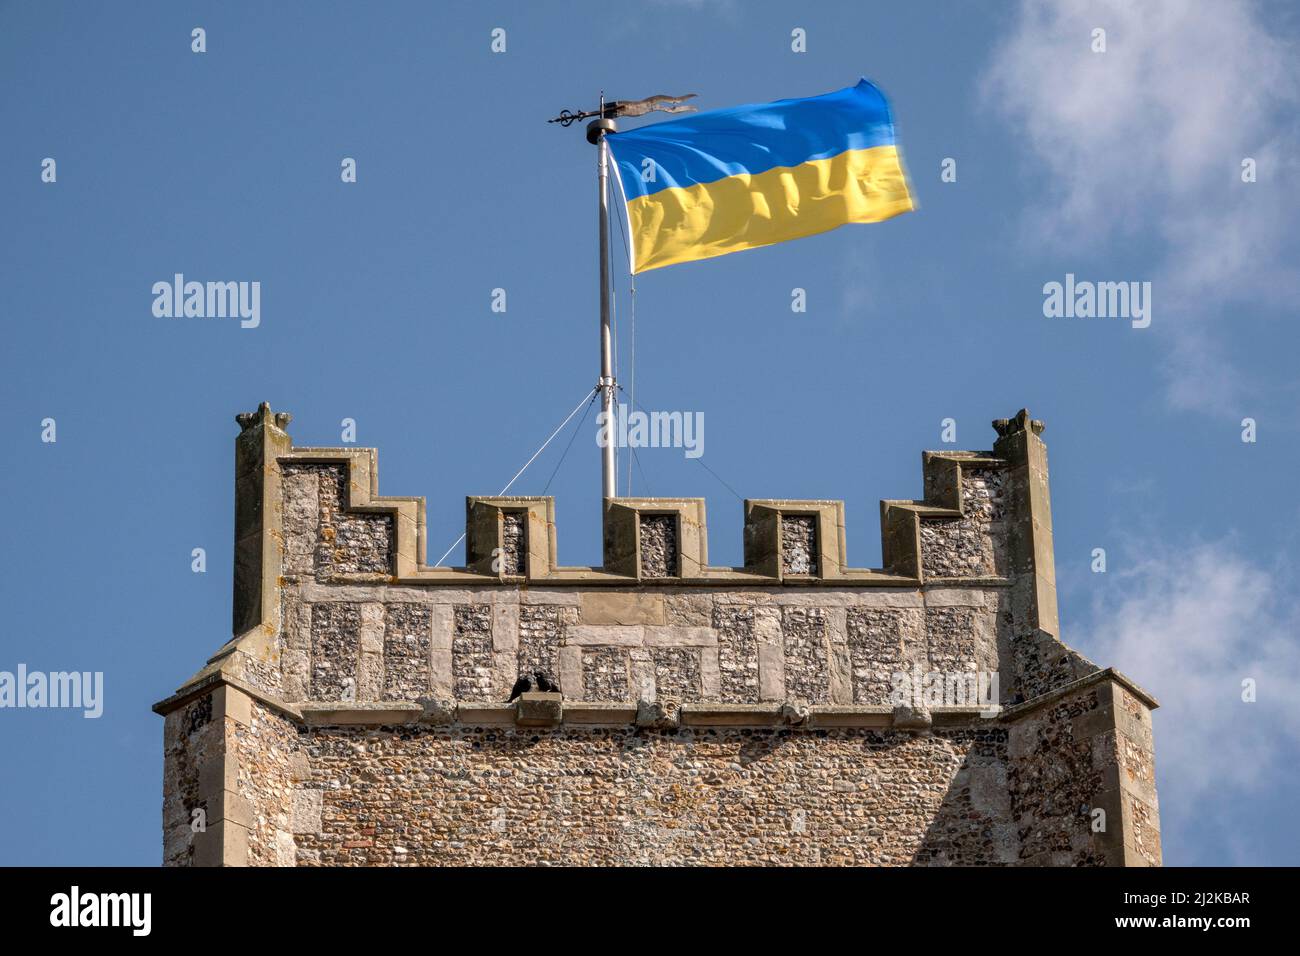 The Ukrainian People's Republic bicolour flag flying from the church tower of St Peter and St Paul's, Aldeburgh, Suffolk. In bright sunshine. Stock Photo